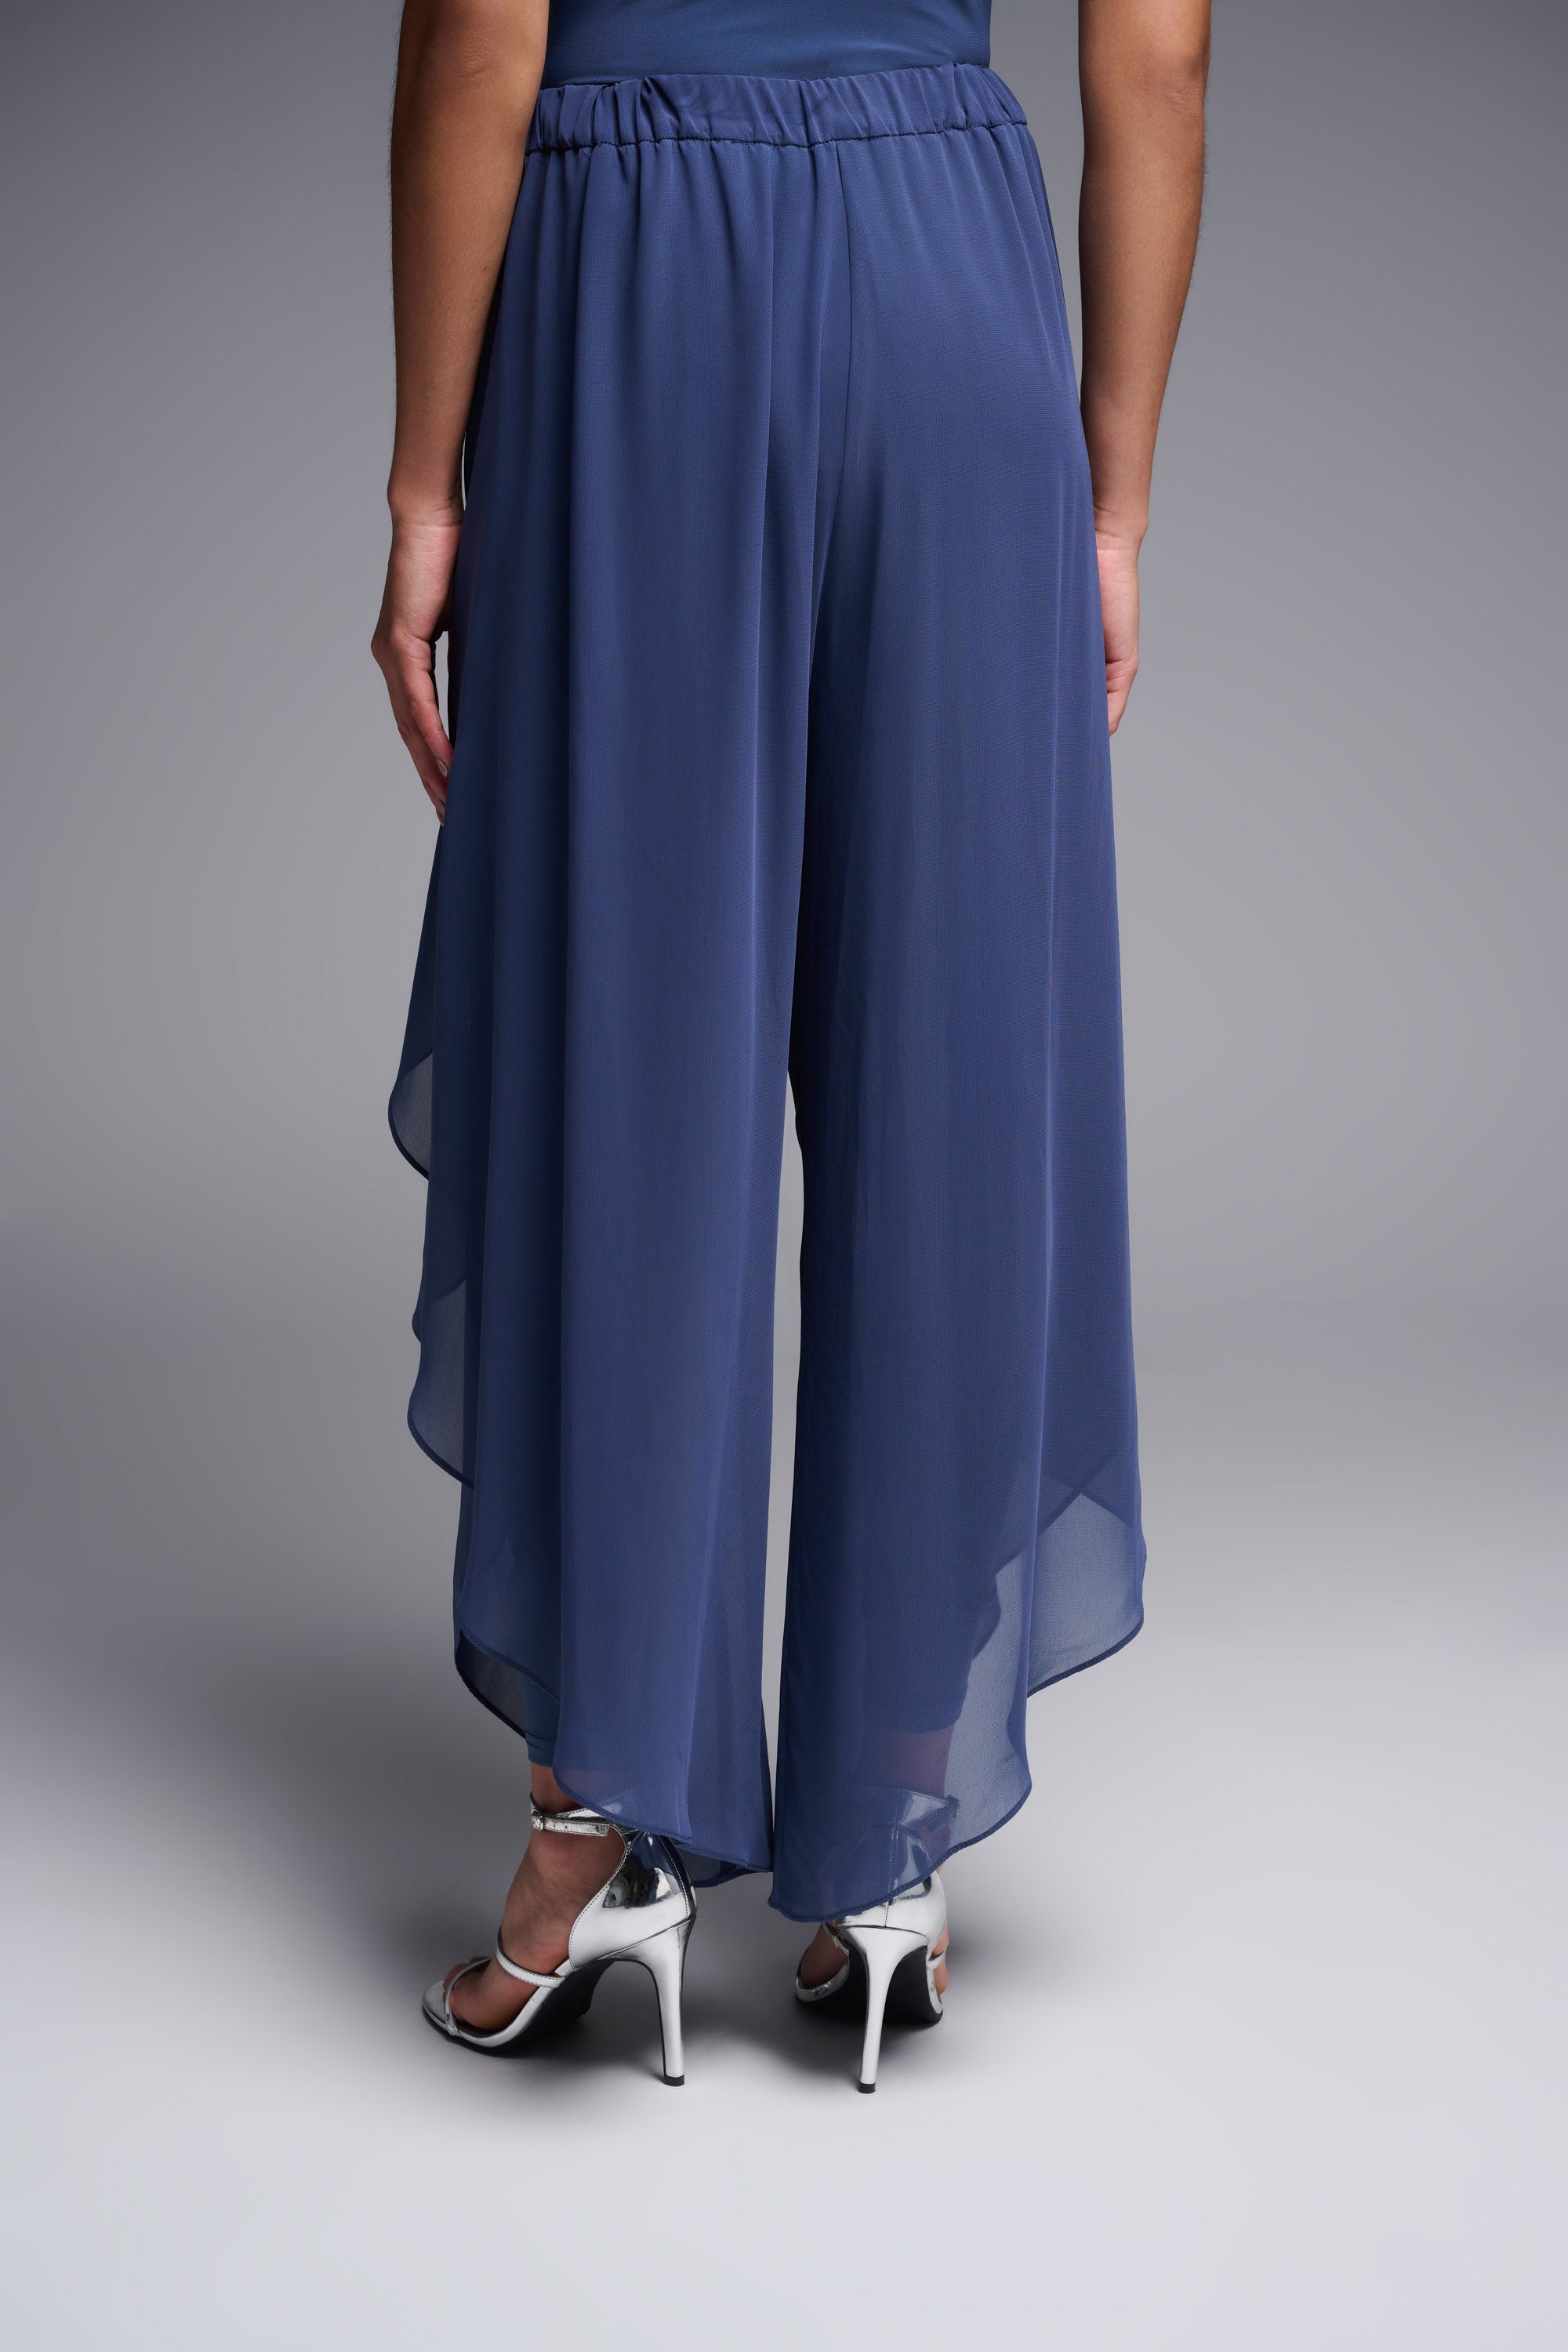 Chiffon And Silky Knit Wide Leg Pants In Mineral Blue 231737 - After Hours Boutique